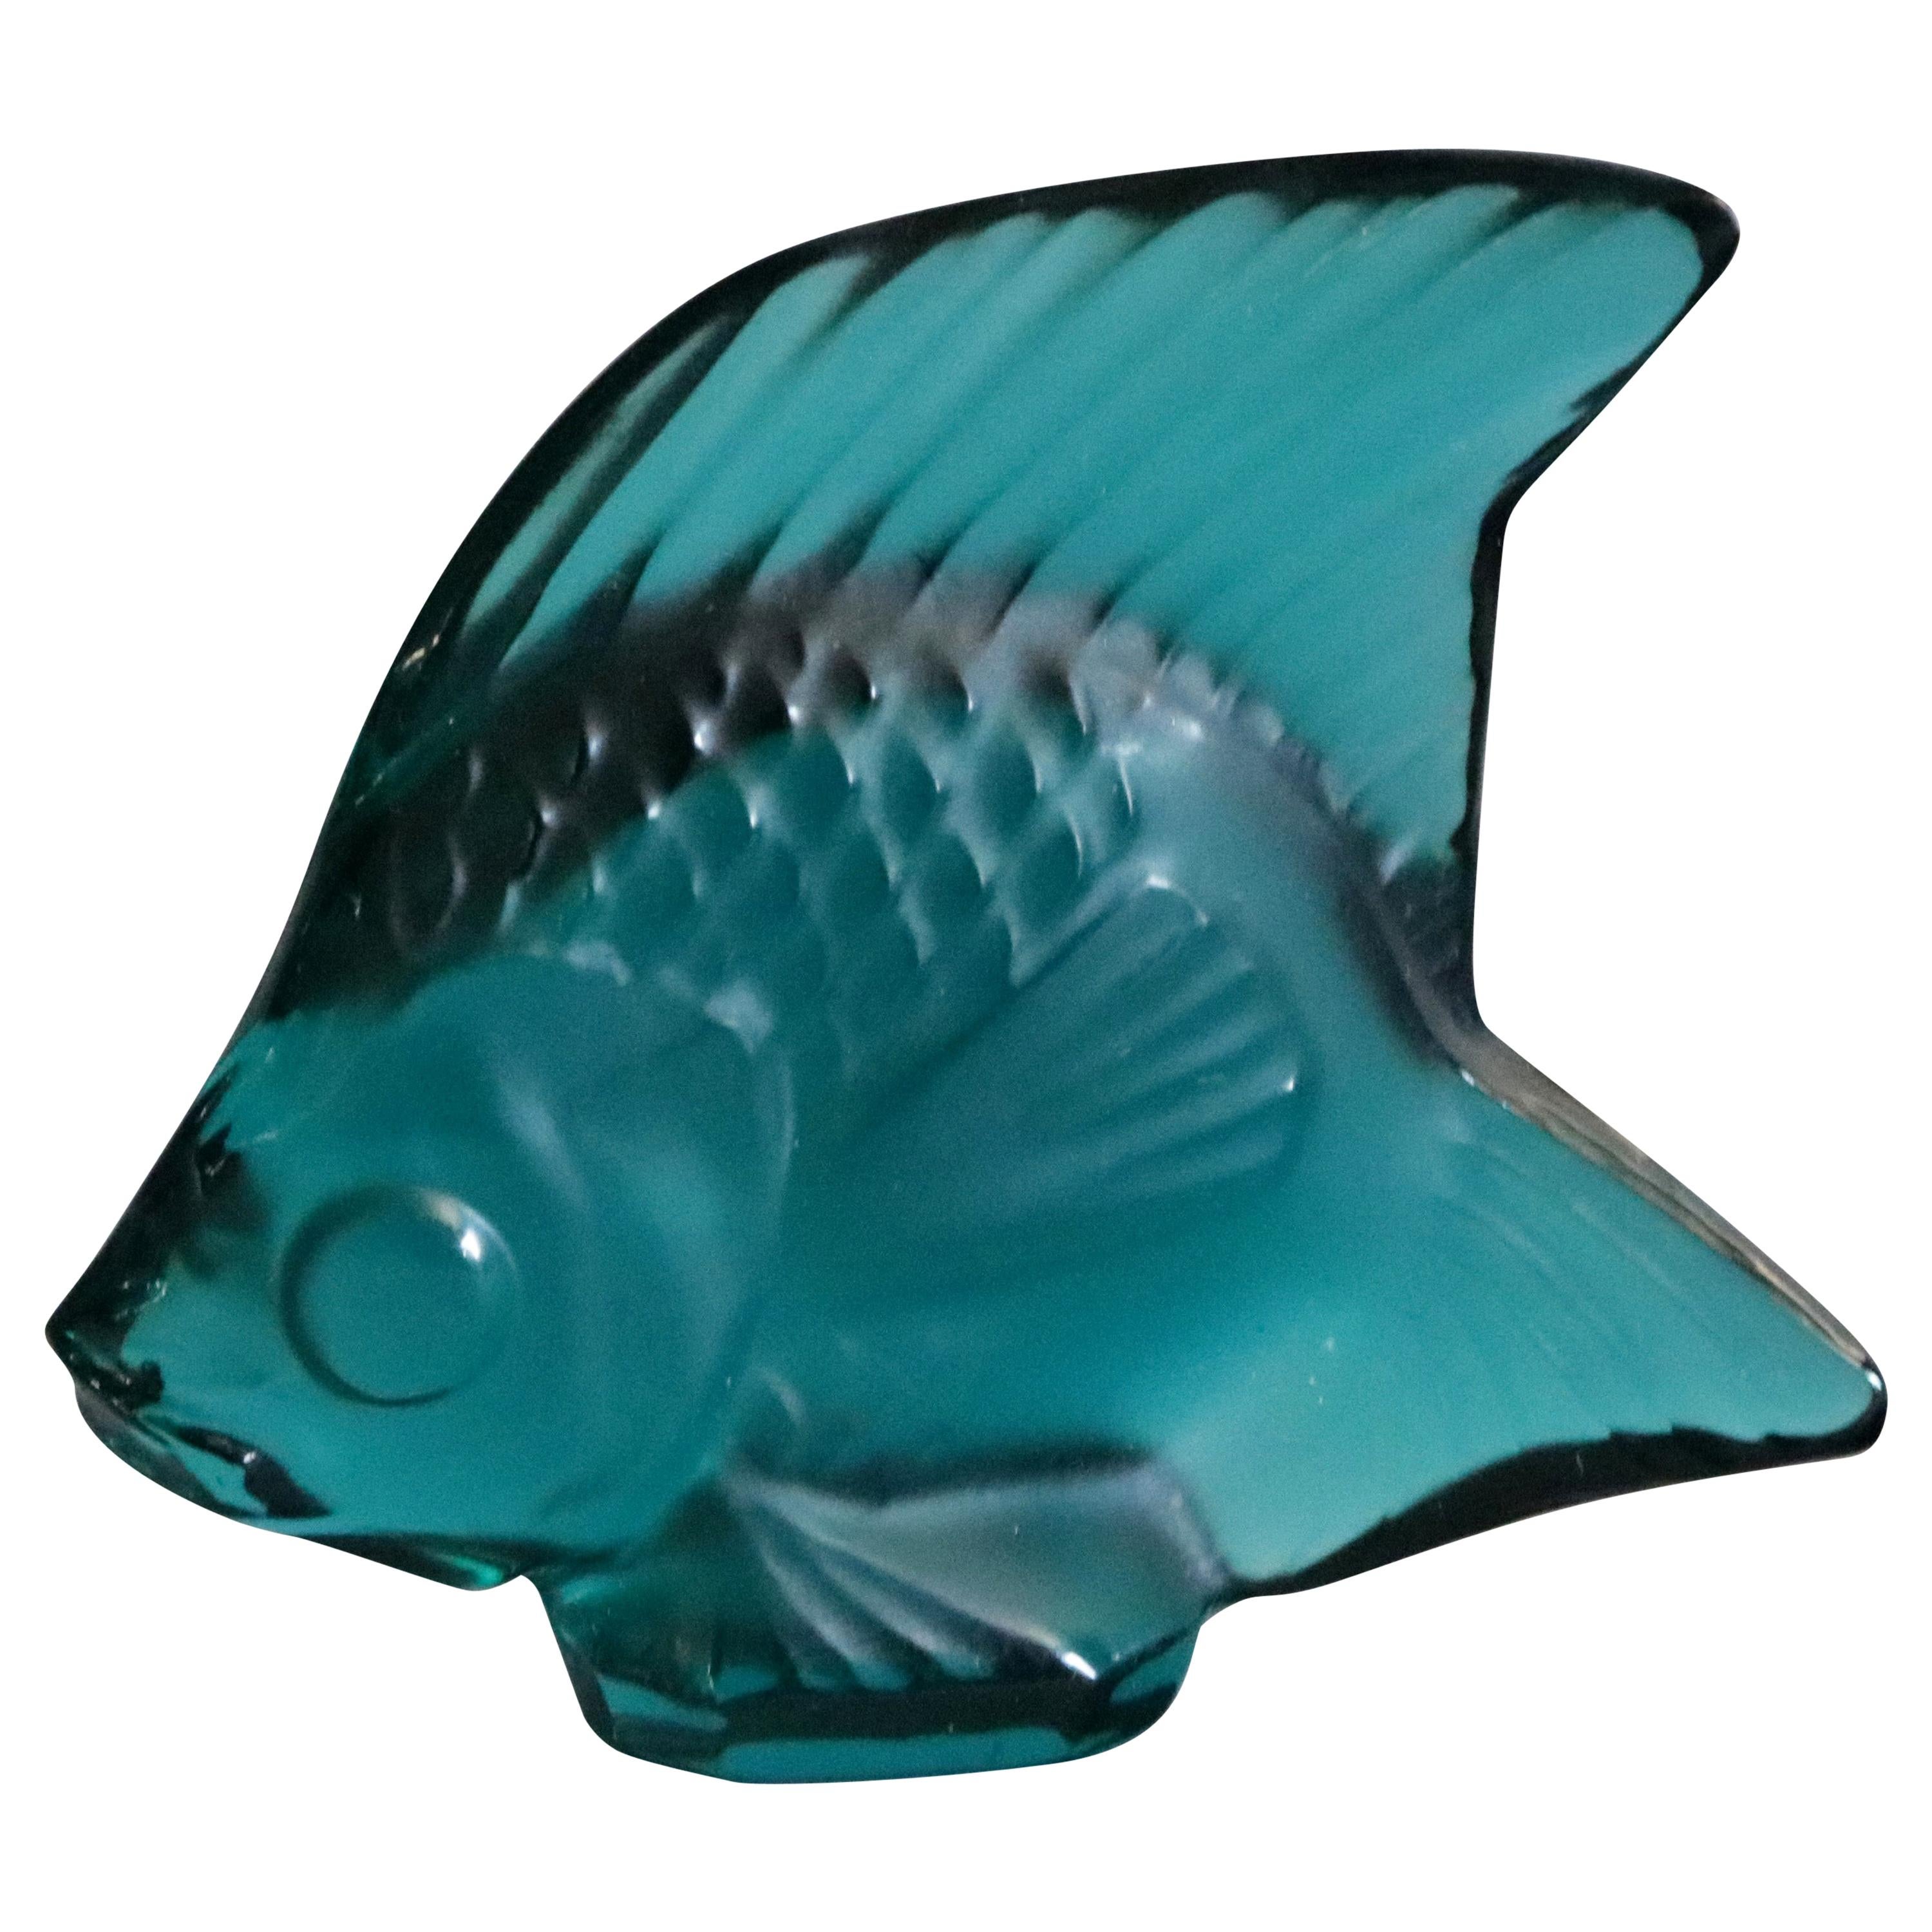 Vintage French Lalique Art Glass Figural Miniature Teal Angel Fish, 20th Century